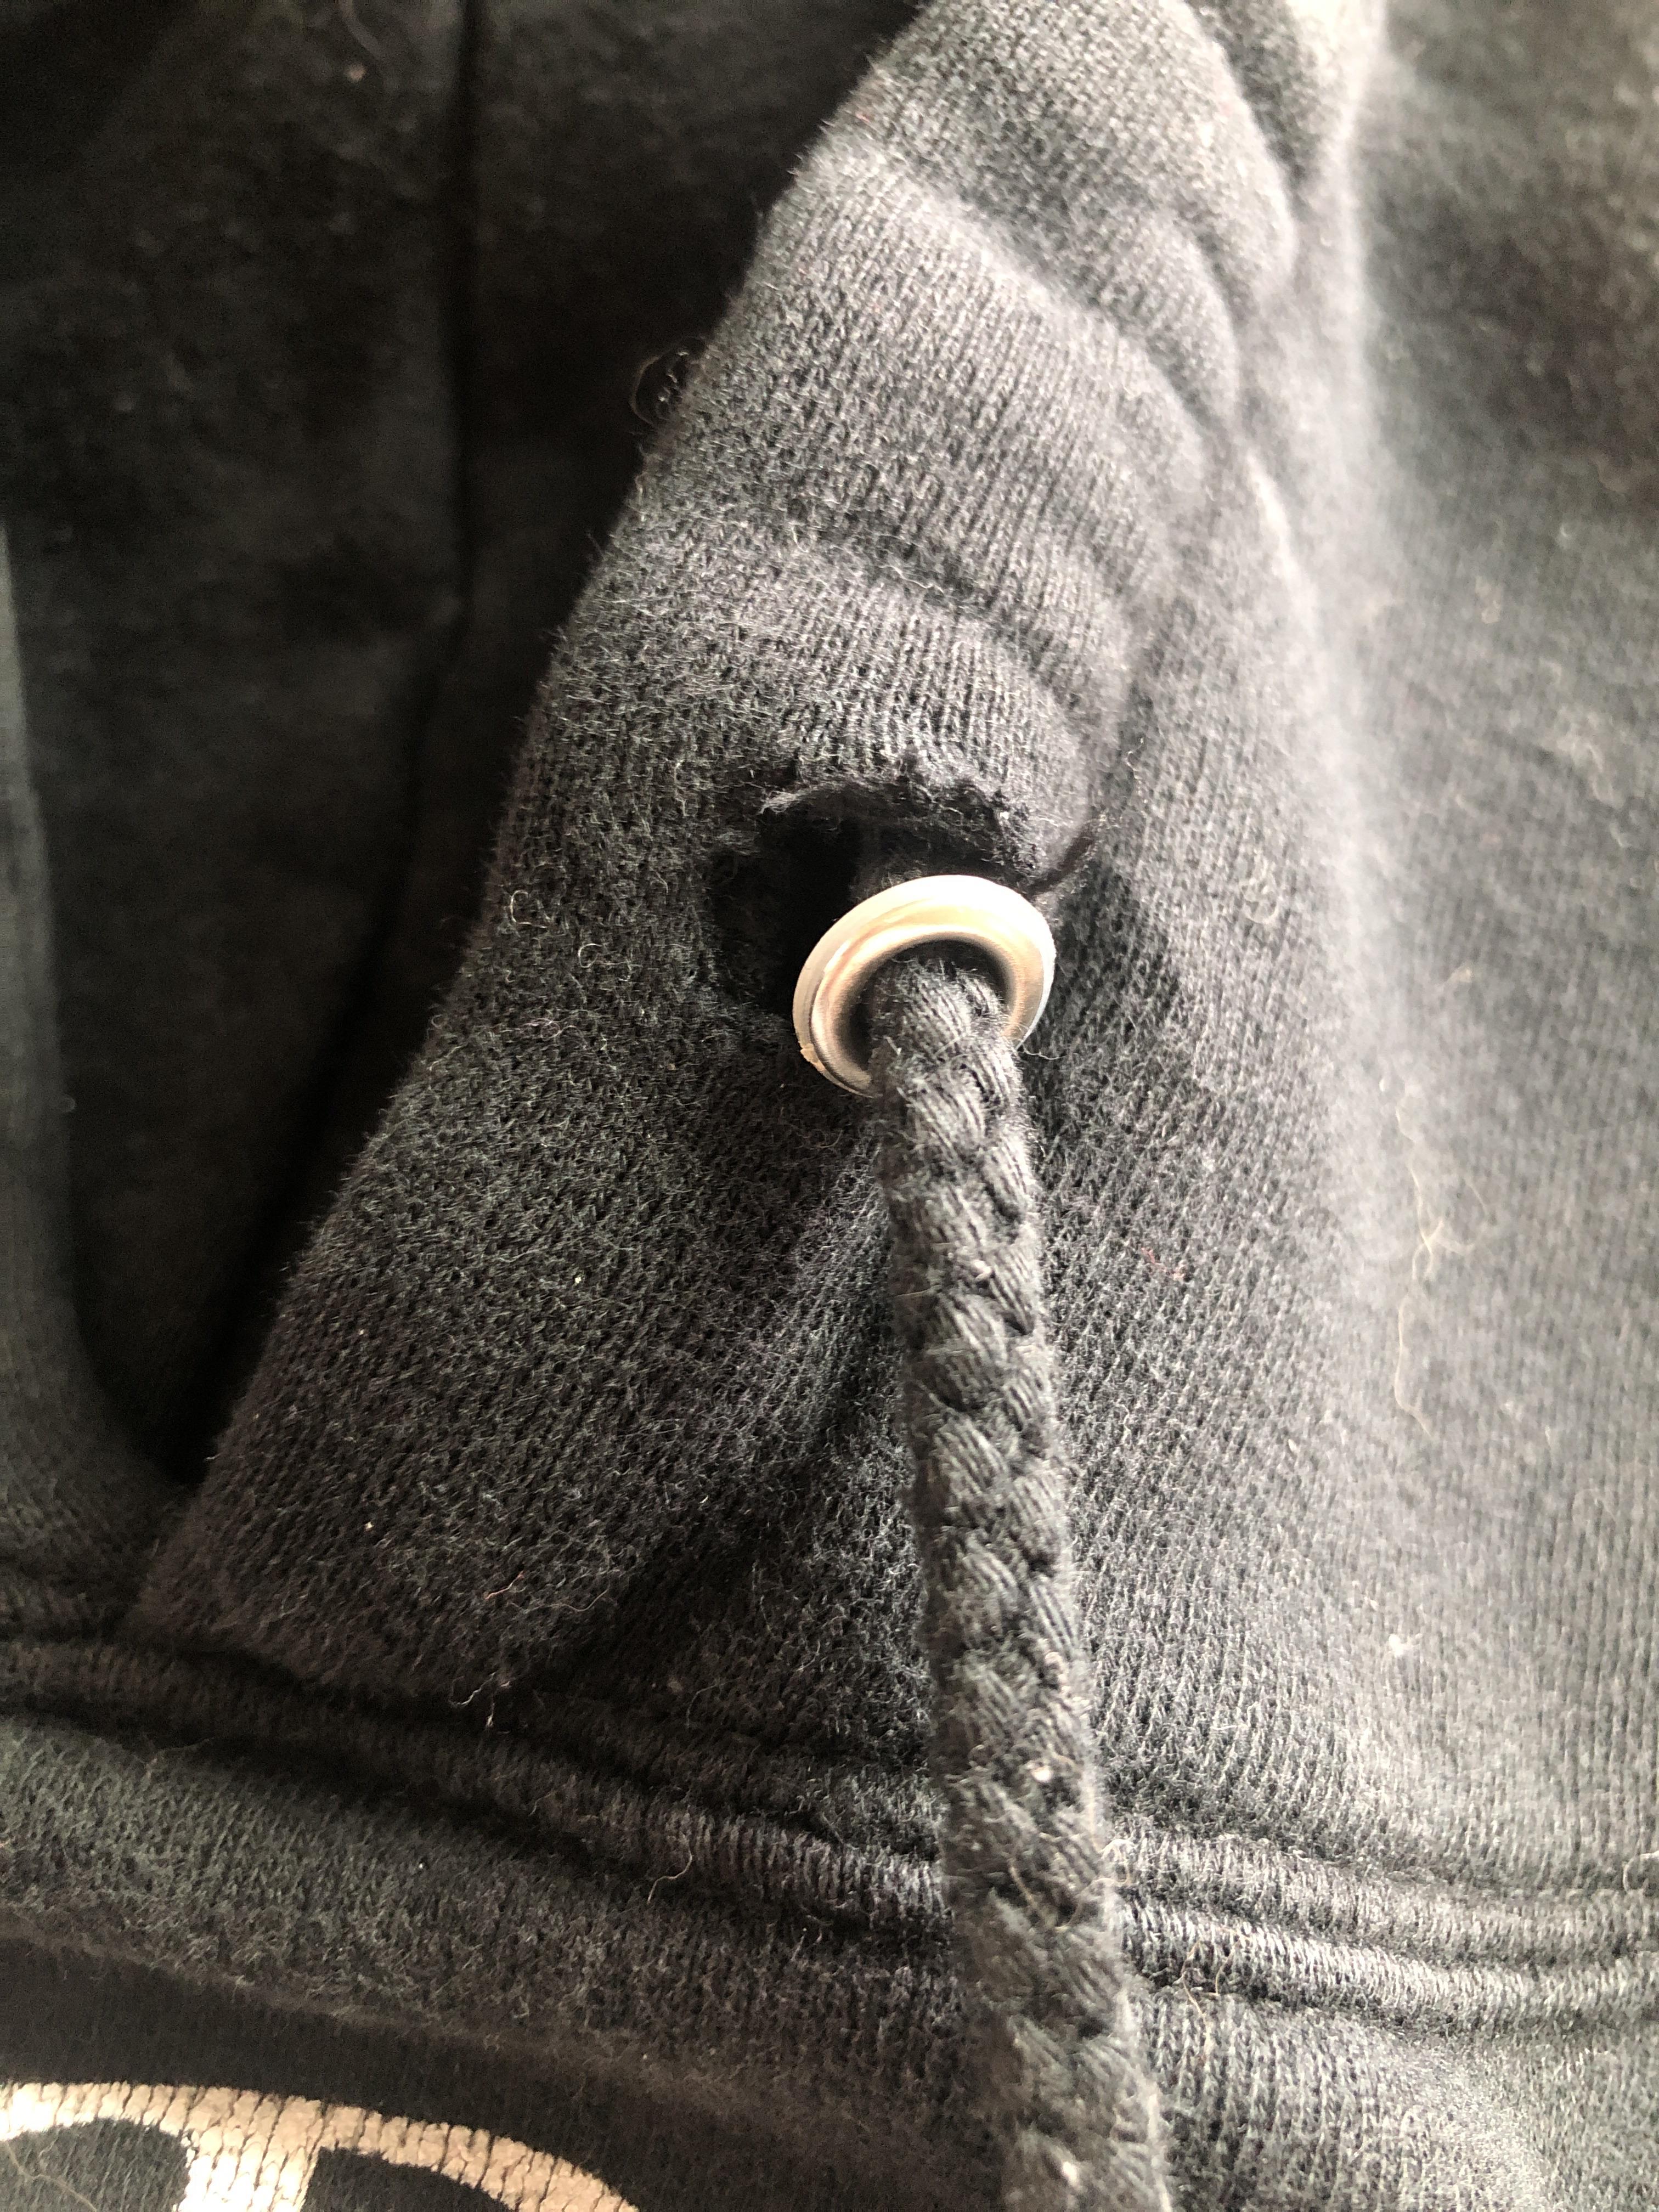 How To Remove Grommets From Hoodie?